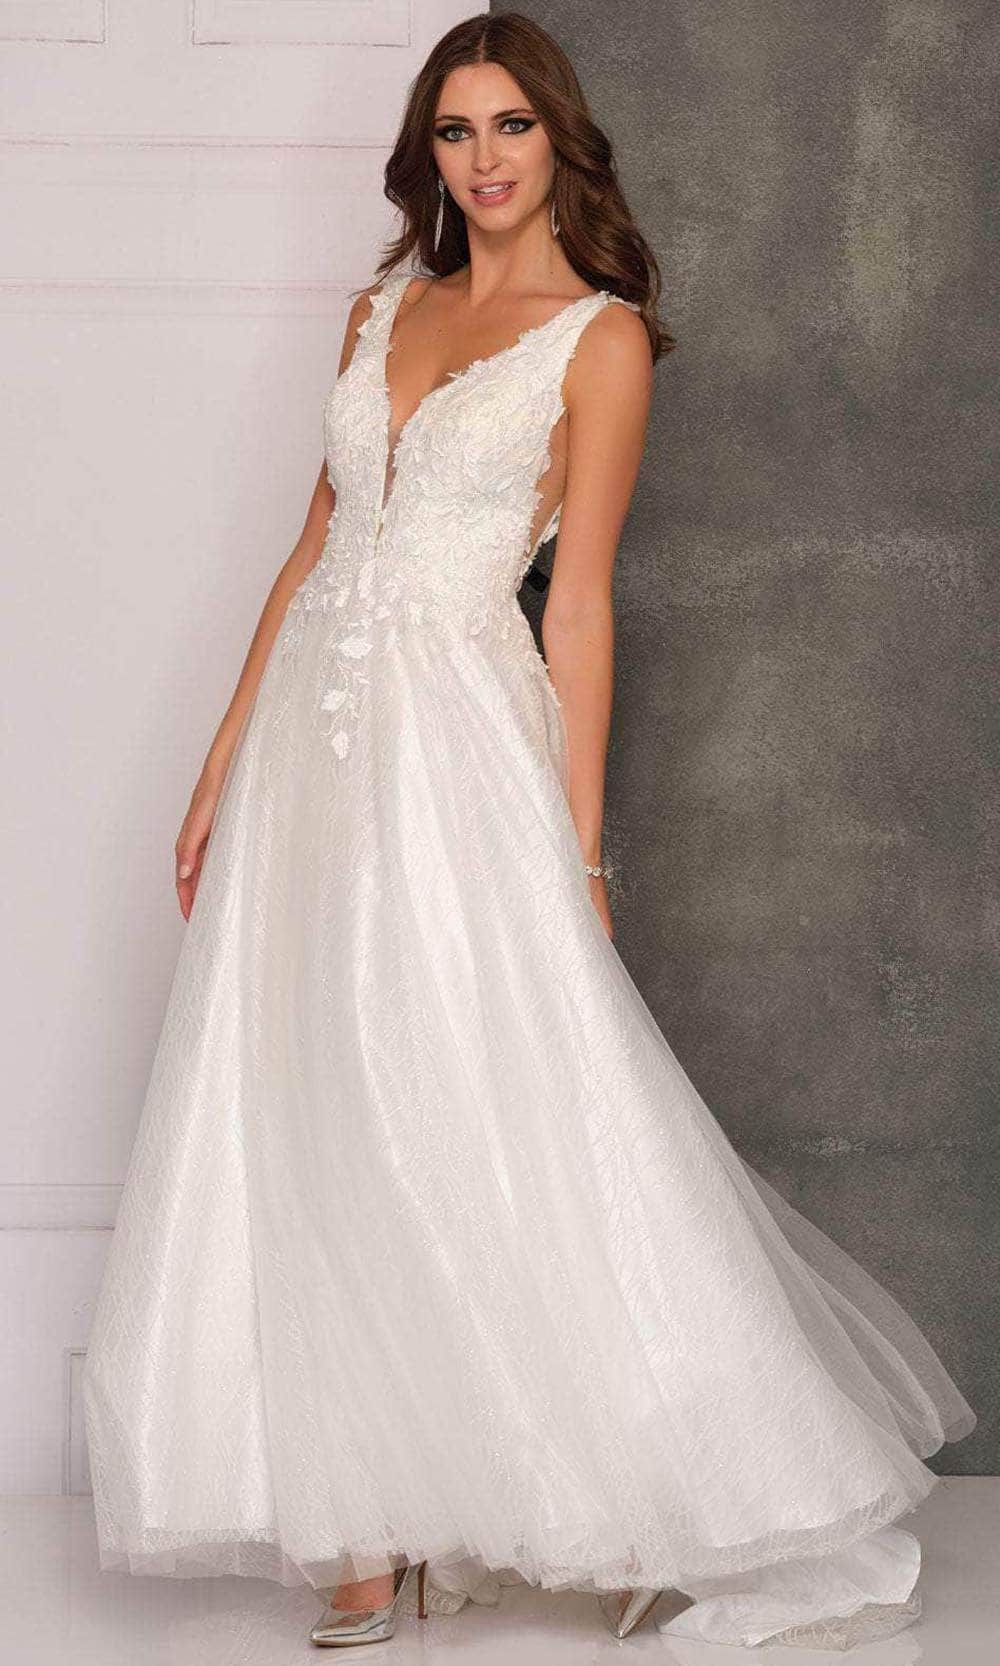 Image of Dave & Johnny Bridal A10288 - Tulle Skirt Bridal Gown